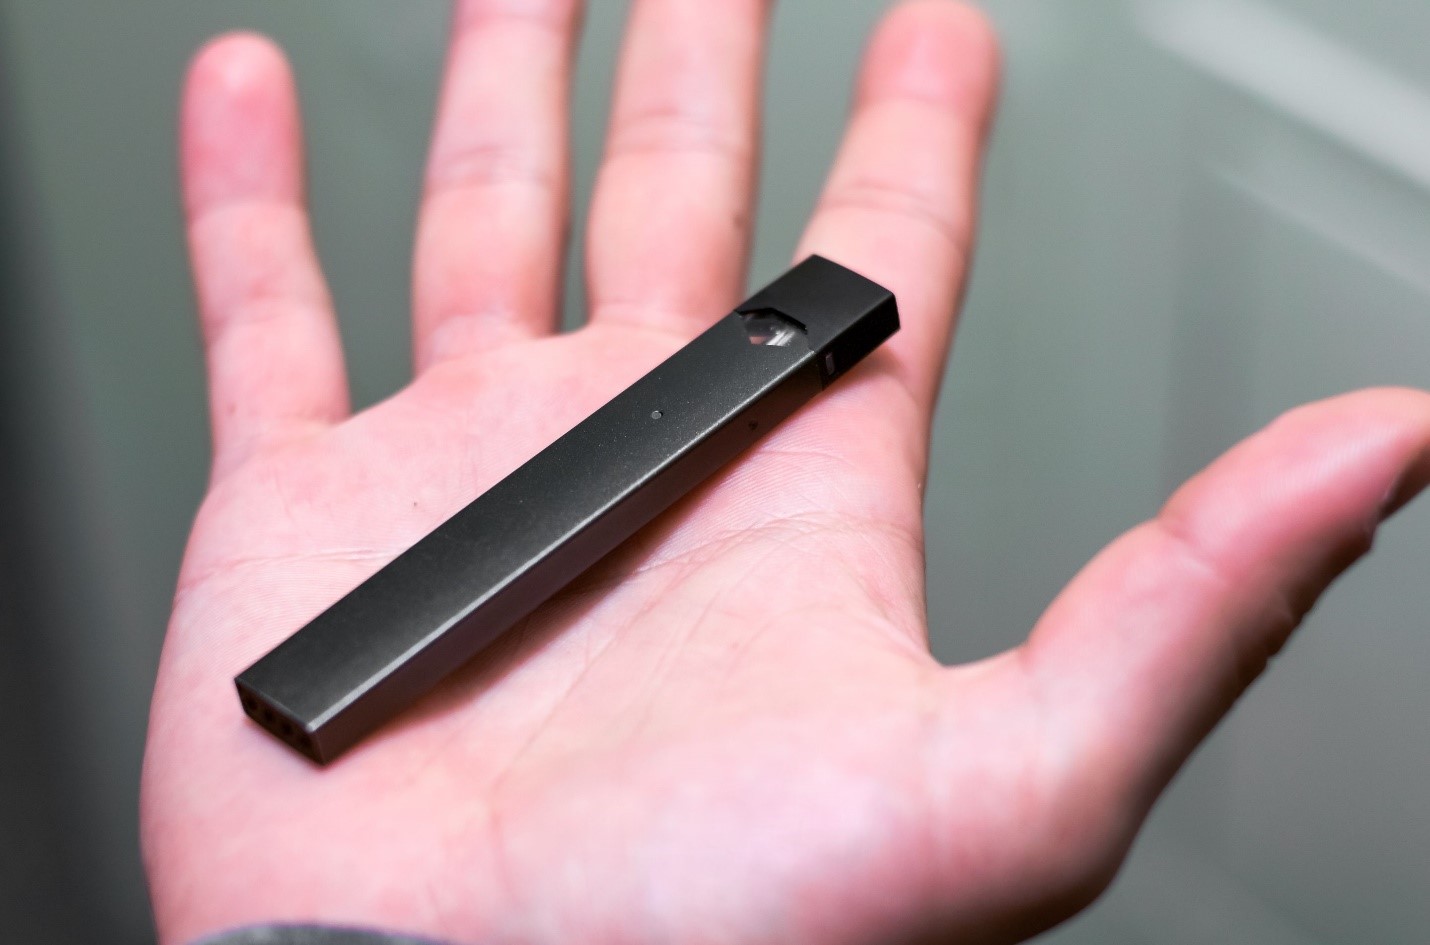 JUUL CEO Kevin Burns to be replaced: Temporary Stop on USA advertising